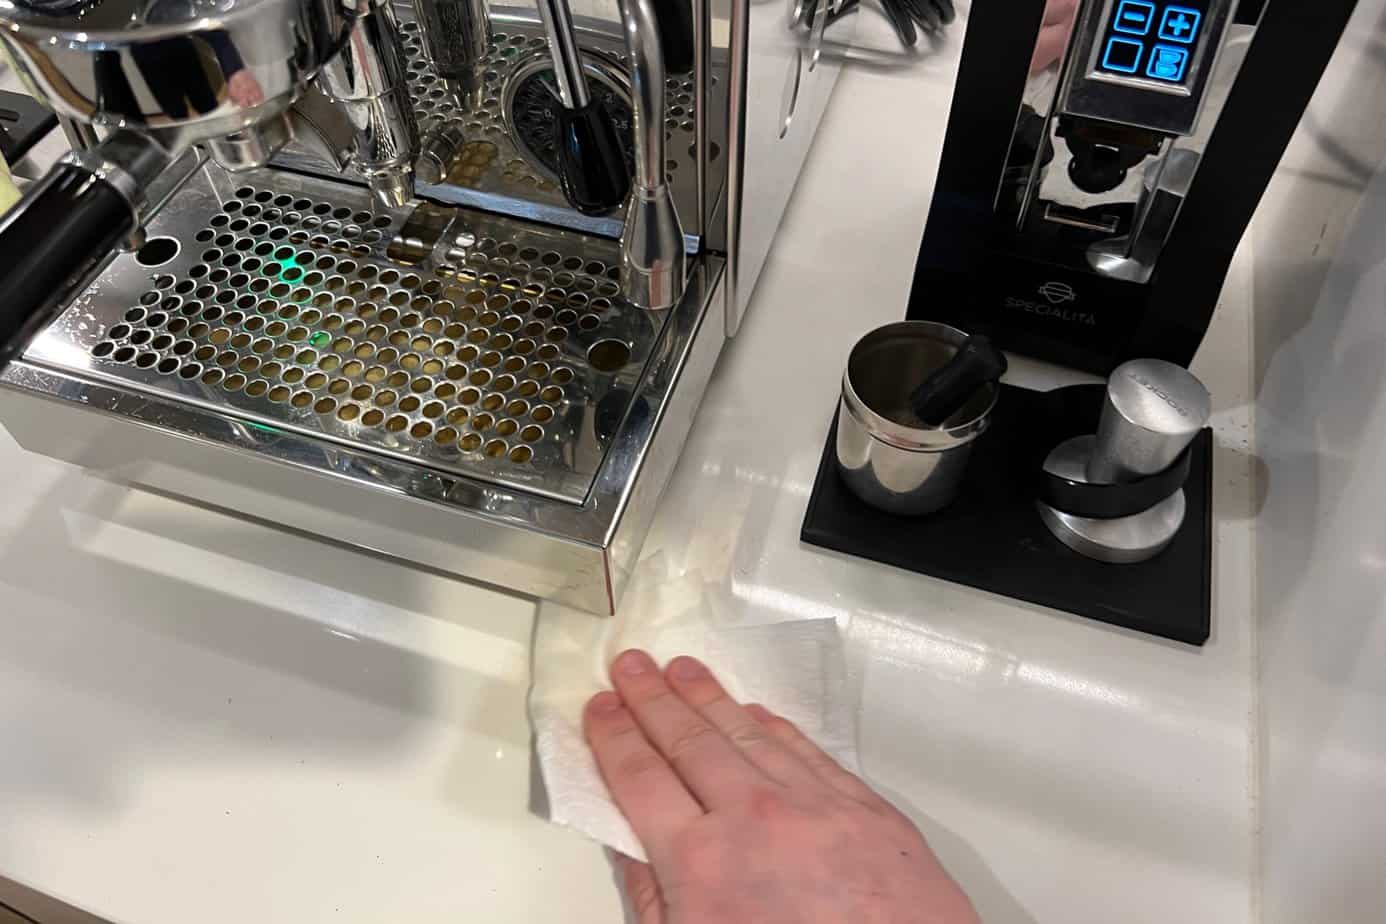 Paper towel cleaning coffee